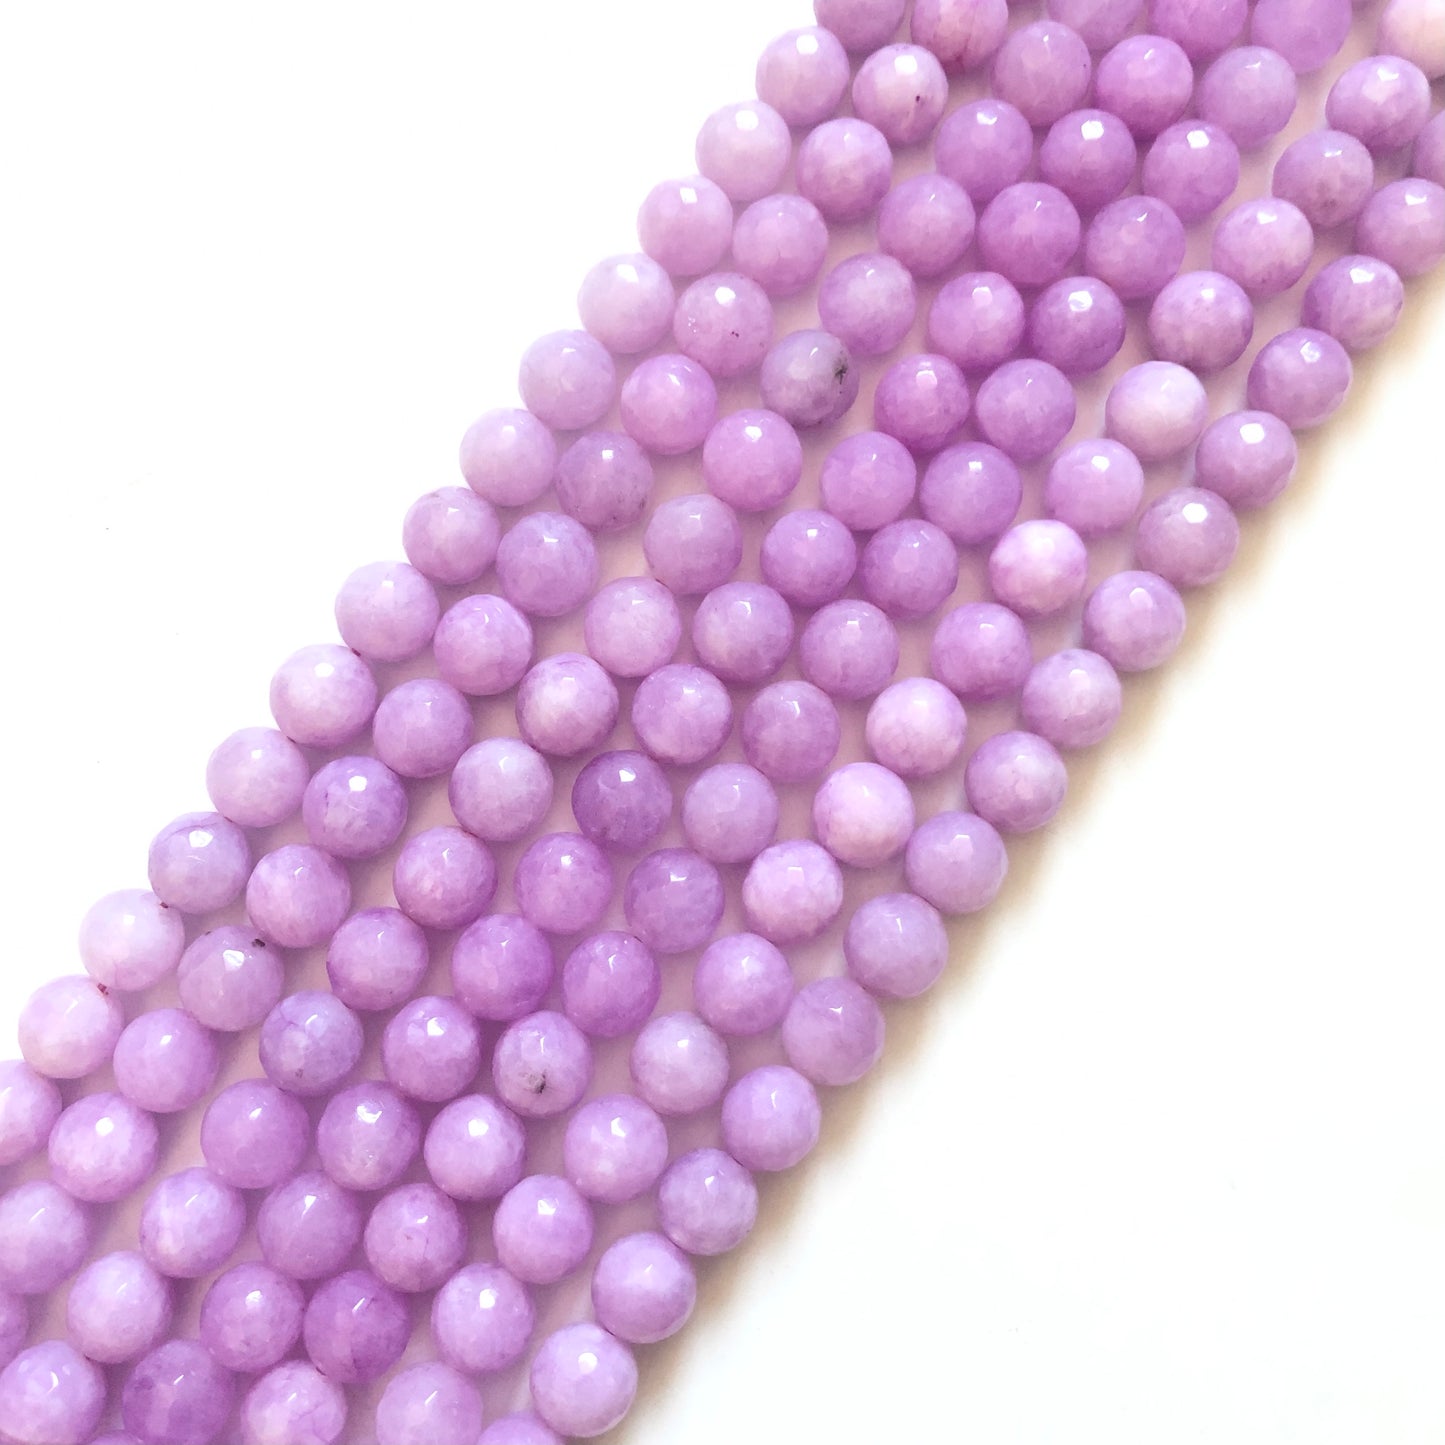 2 Strands/lot 10mm Purple Faceted Jade Stone Beads Stone Beads Faceted Jade Beads Charms Beads Beyond